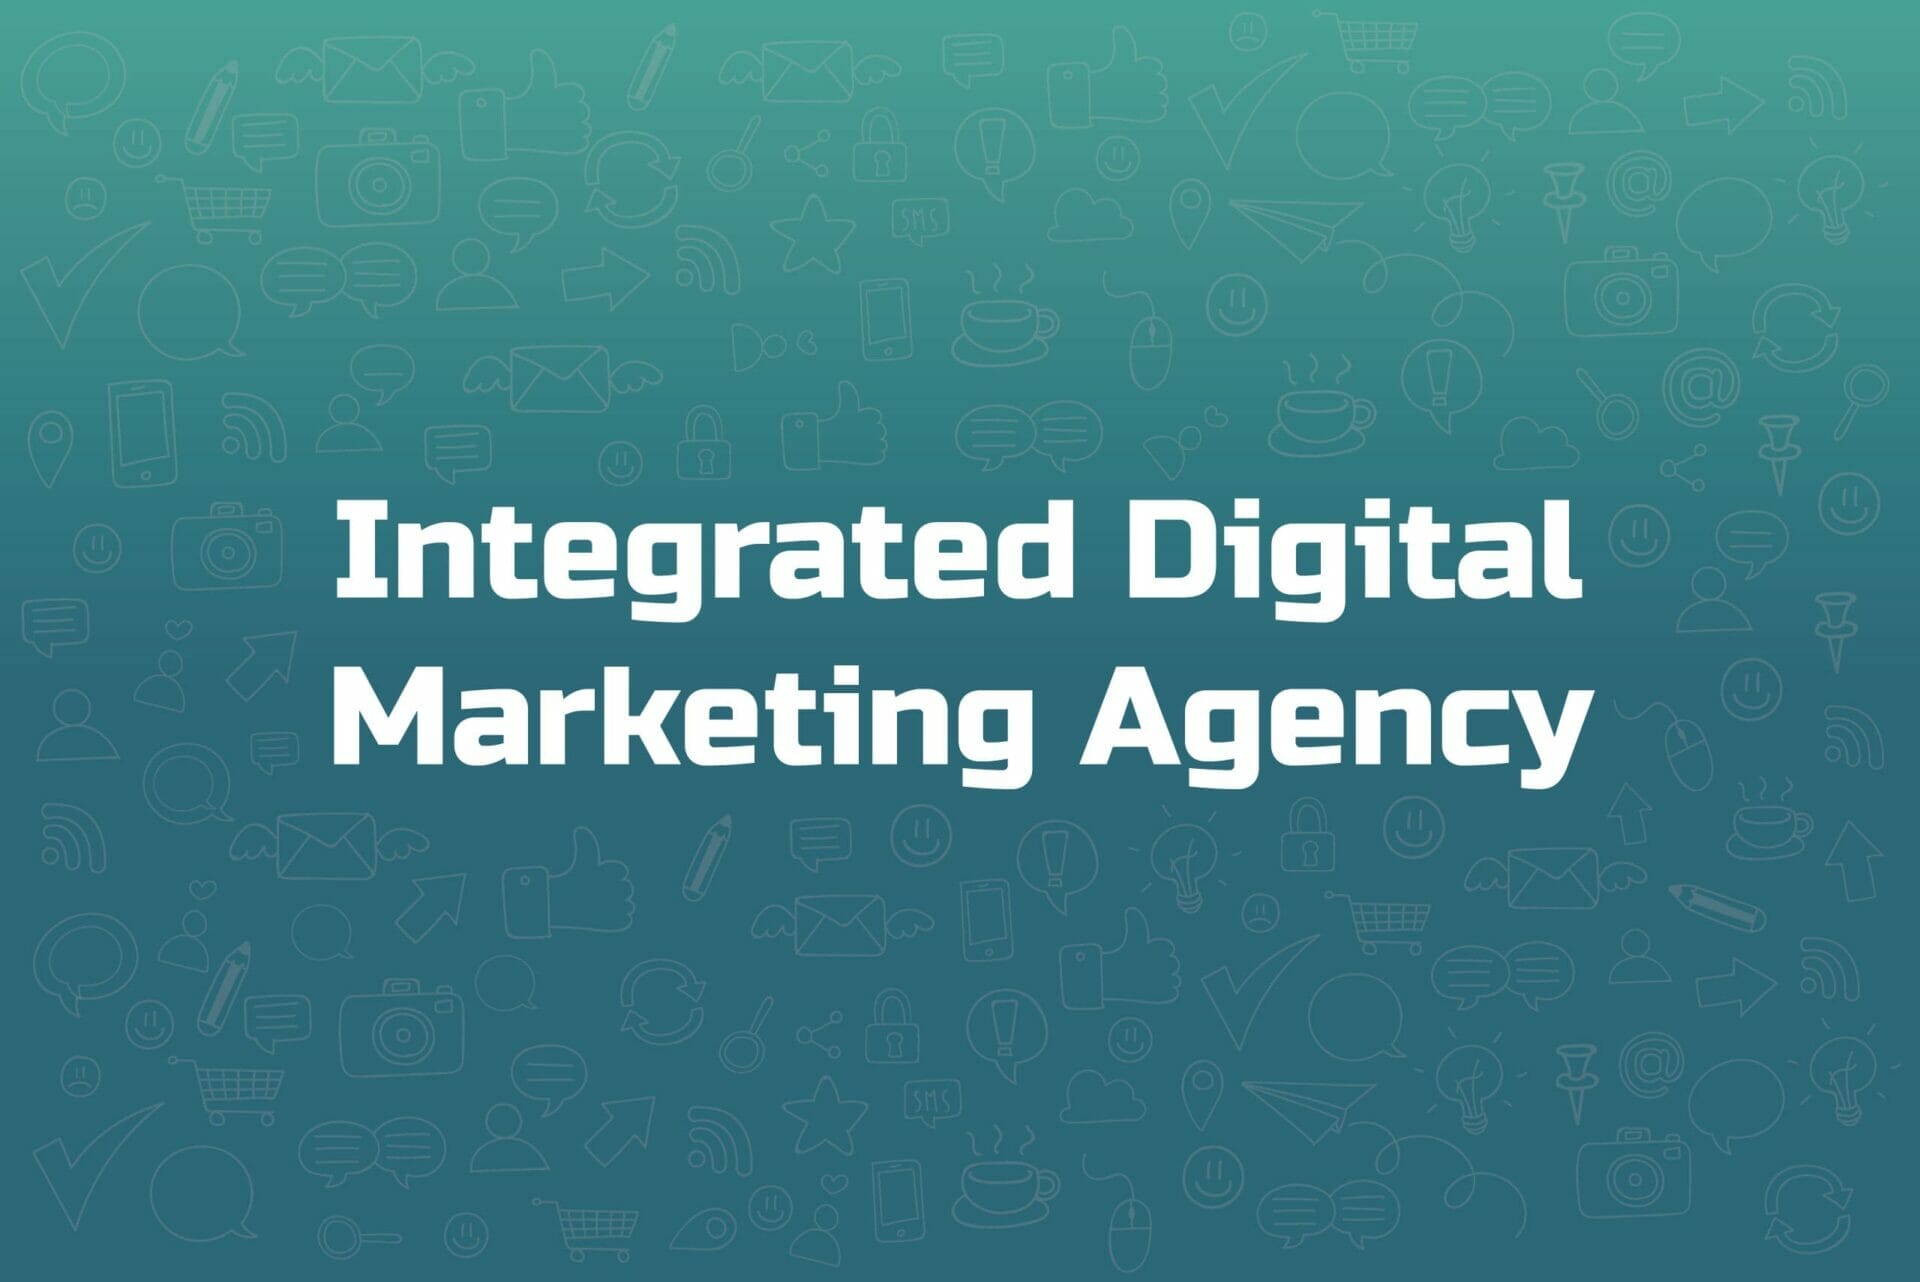 What Is An Integrated Digital Marketing Agency & Why Invest In Them?